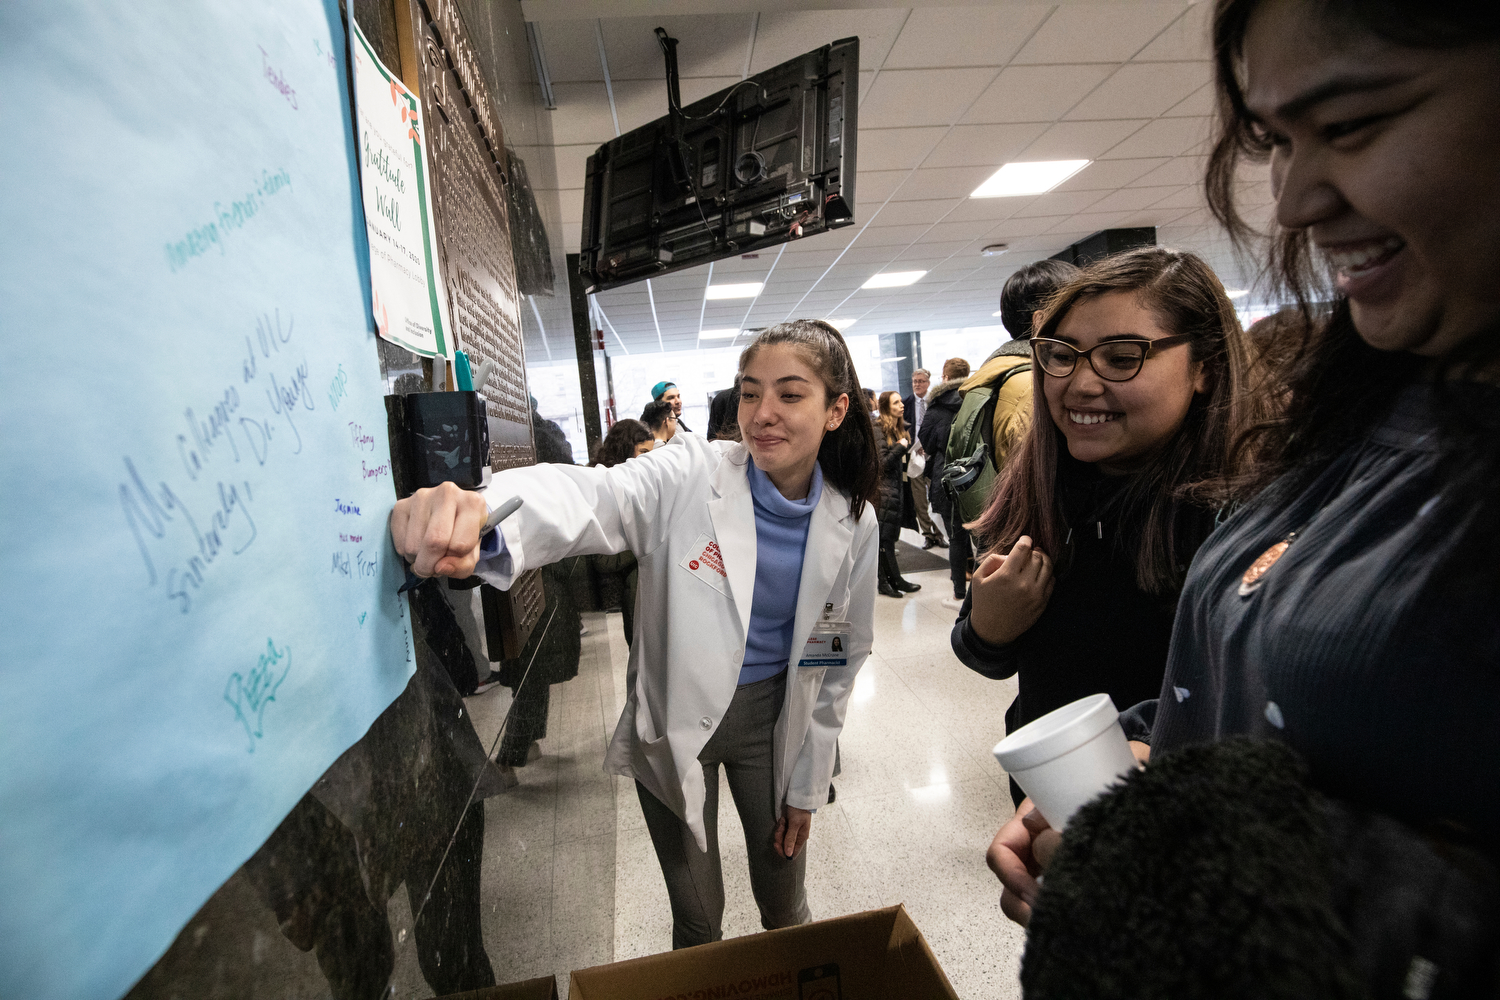 Amanda McCrone (PHARM '23), center, writes the names of her friends, Yoselin Flores and Anna Lisa Russell, right, on a "gratitude wall" during a welcoming event for pharmacy students at the college.